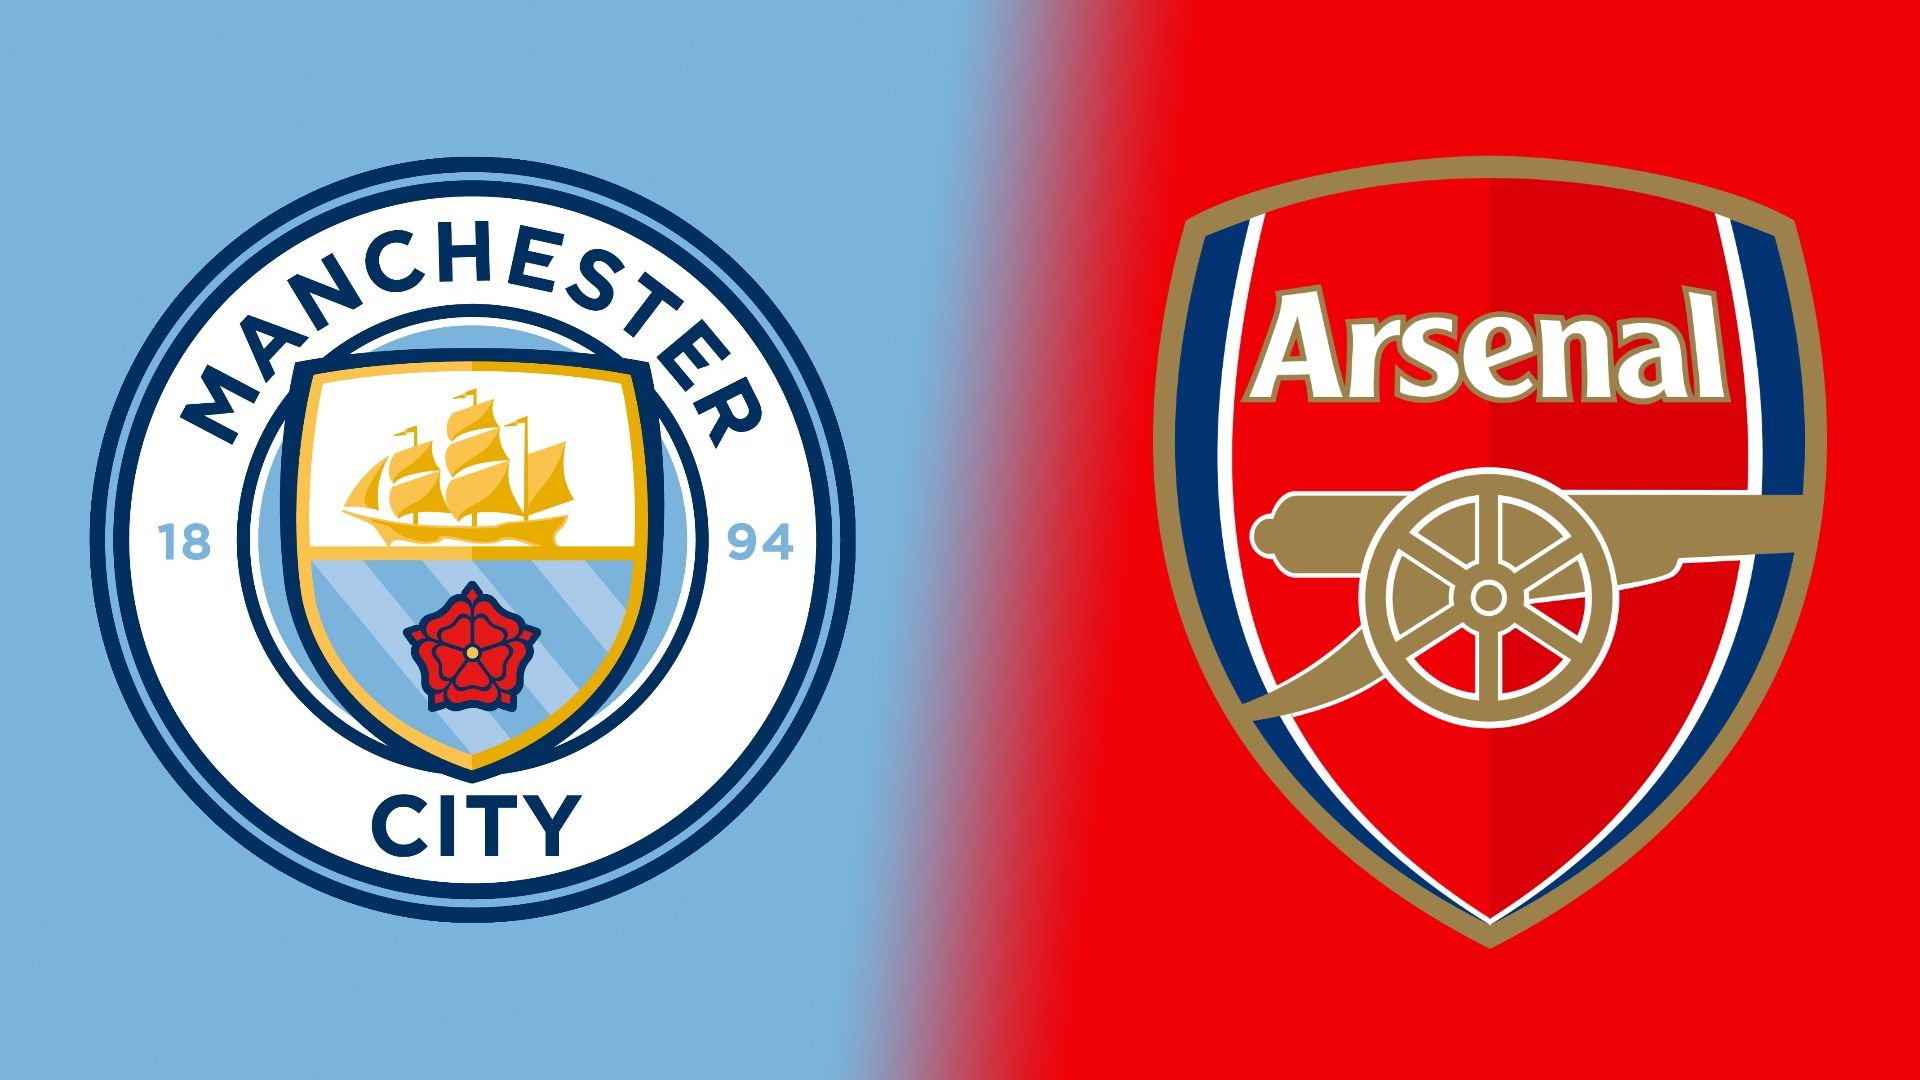 Arsenal vs. Man City livestream: How to watch from anywhere